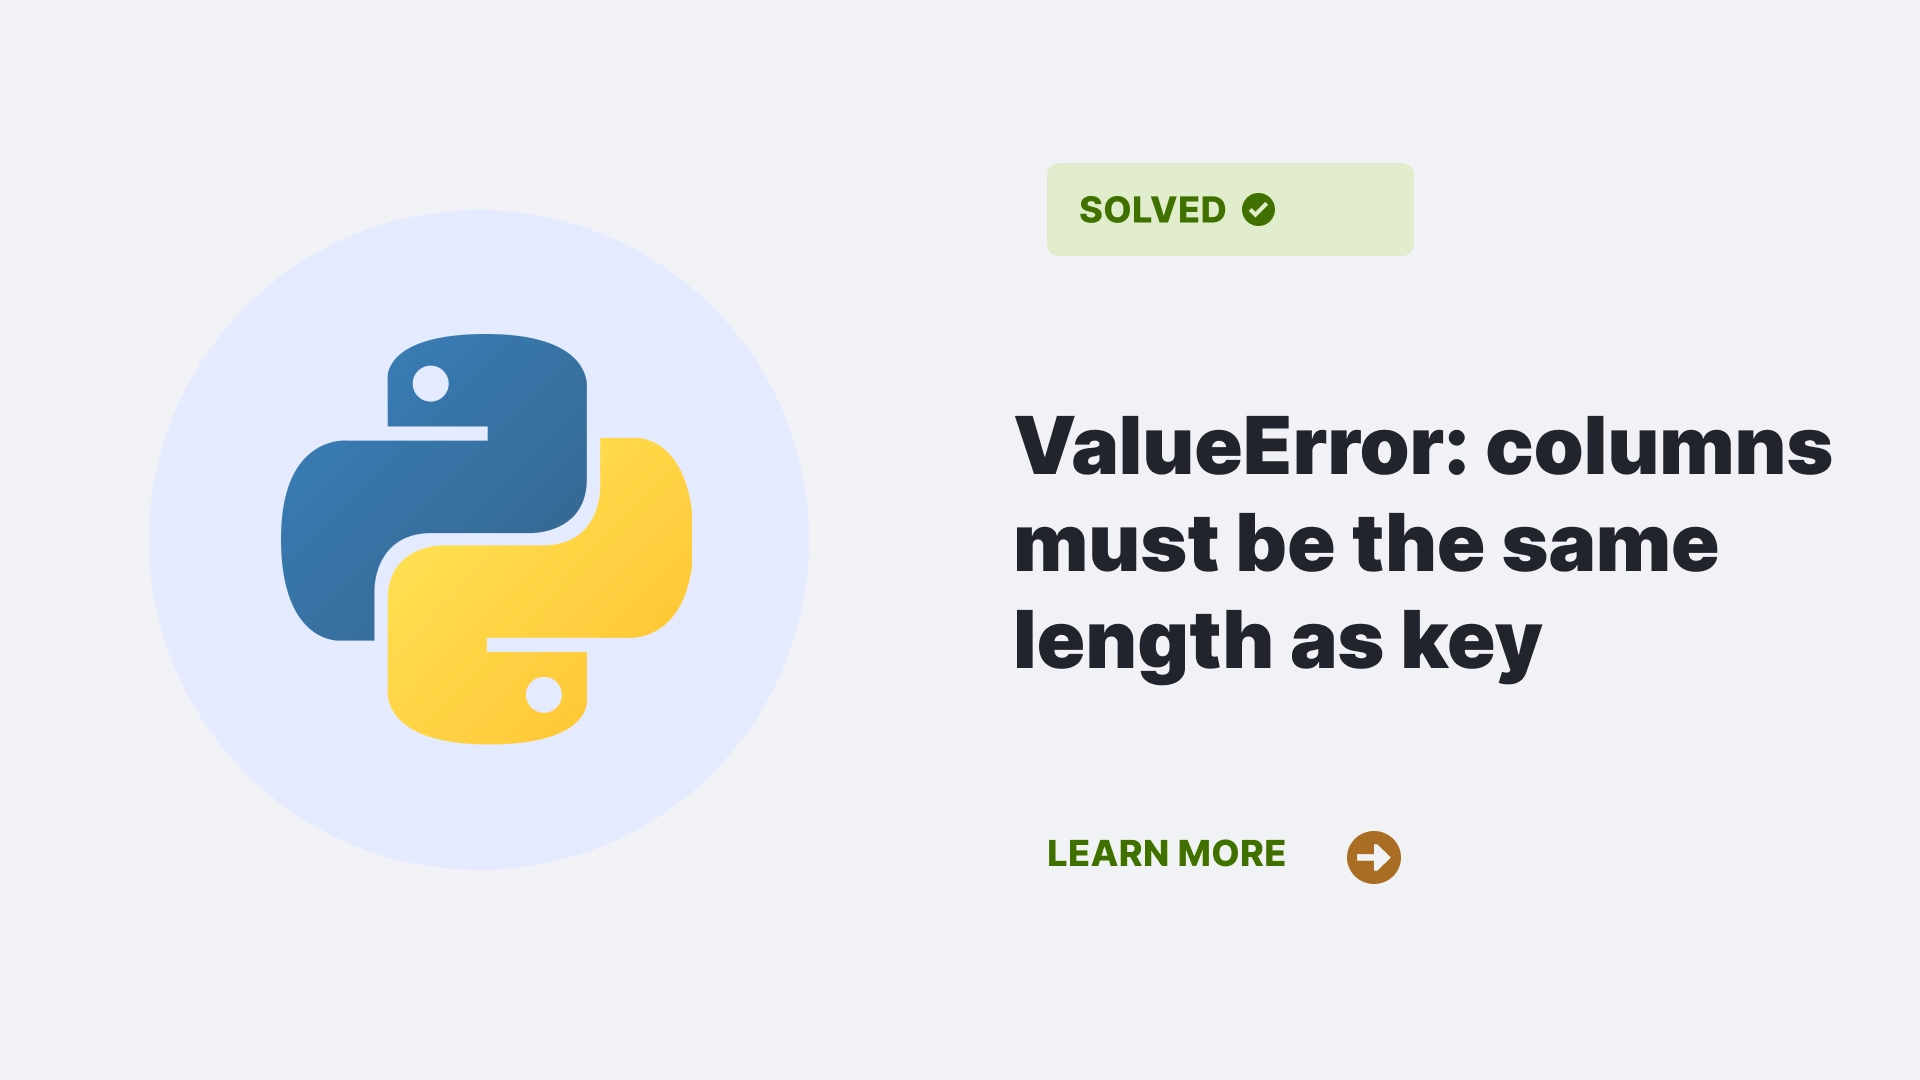 ValueError: columns must be the same length as key